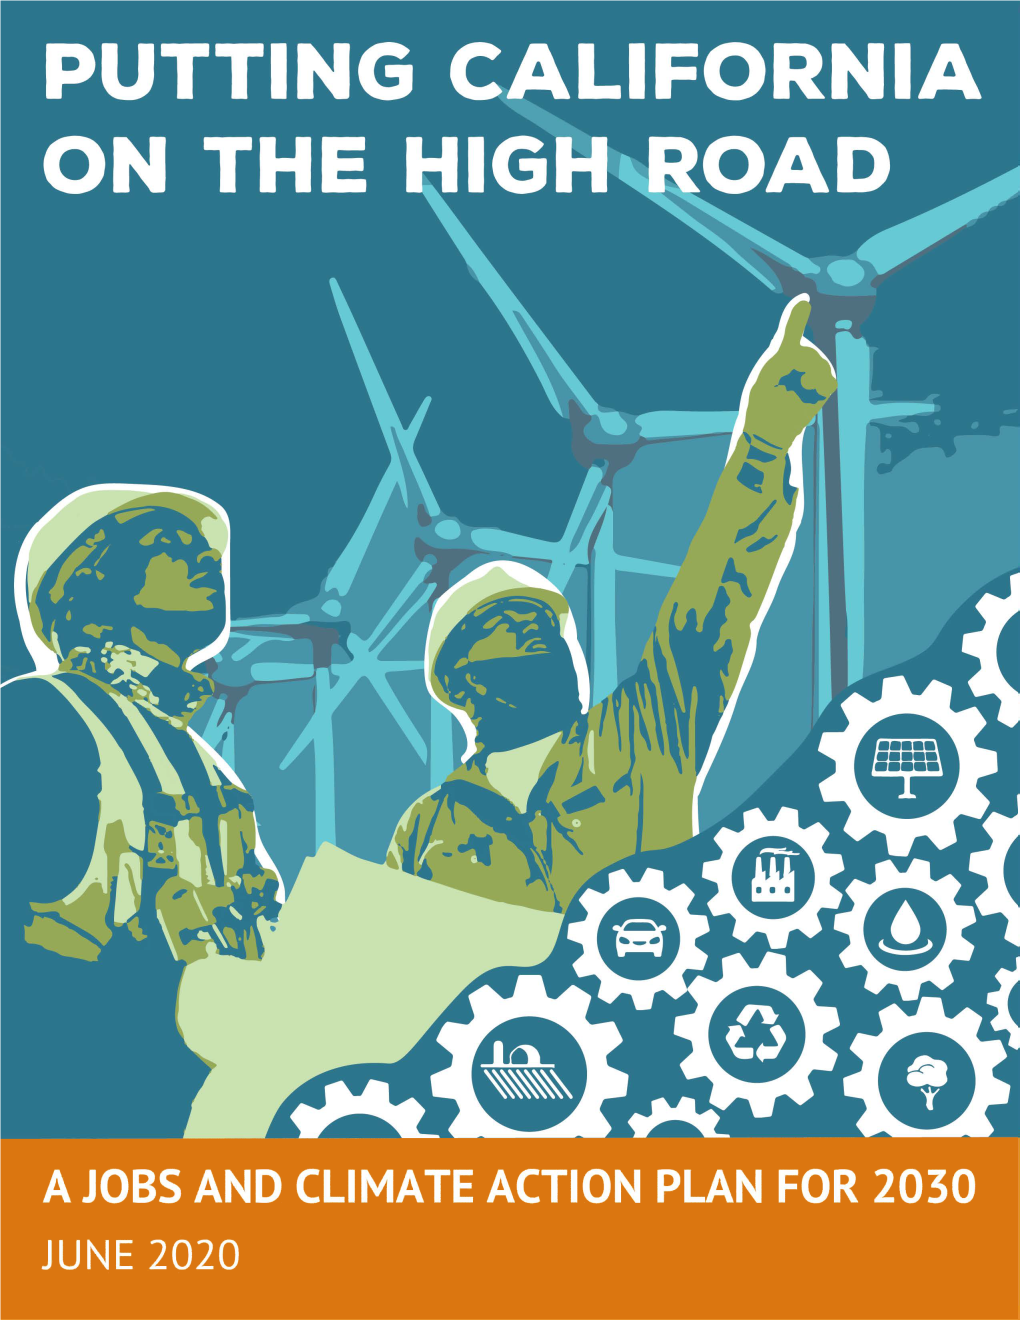 Putting California on the High Road: a Jobs and Climate Action Plan for 2030,” to the Legislature Pursuant to Assembly Bill 398 (E